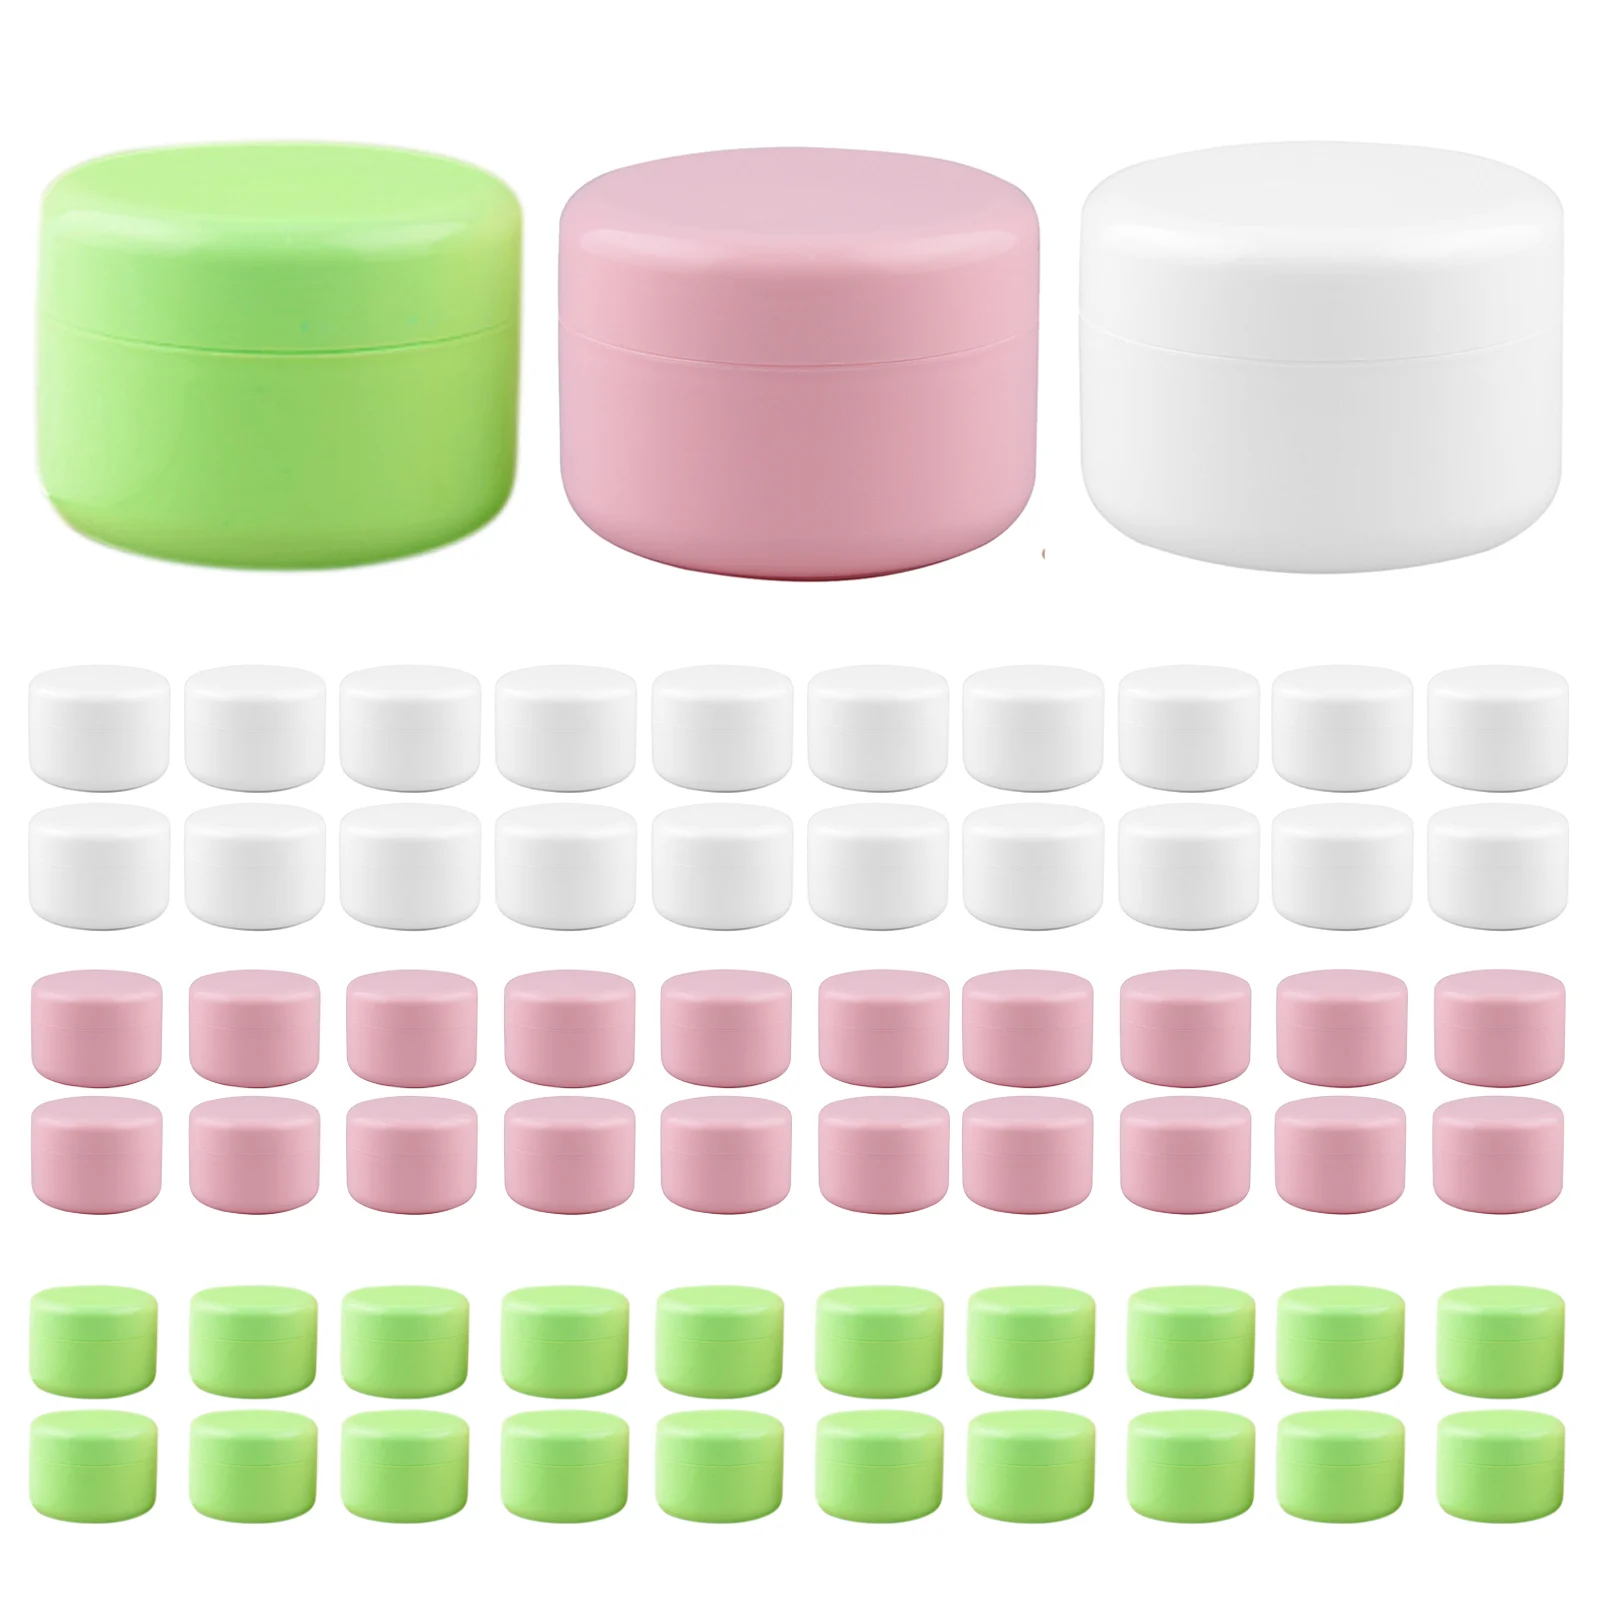 20PCS Cosmetic Containers 20g Plastic Empty Creams Lotions Toners Lip Gloss Storage Jar Boxes for Home Travel Business Trip merci maitresse print jewellery box teacher life travel necklace earring holder storage display boxes teacher gifts